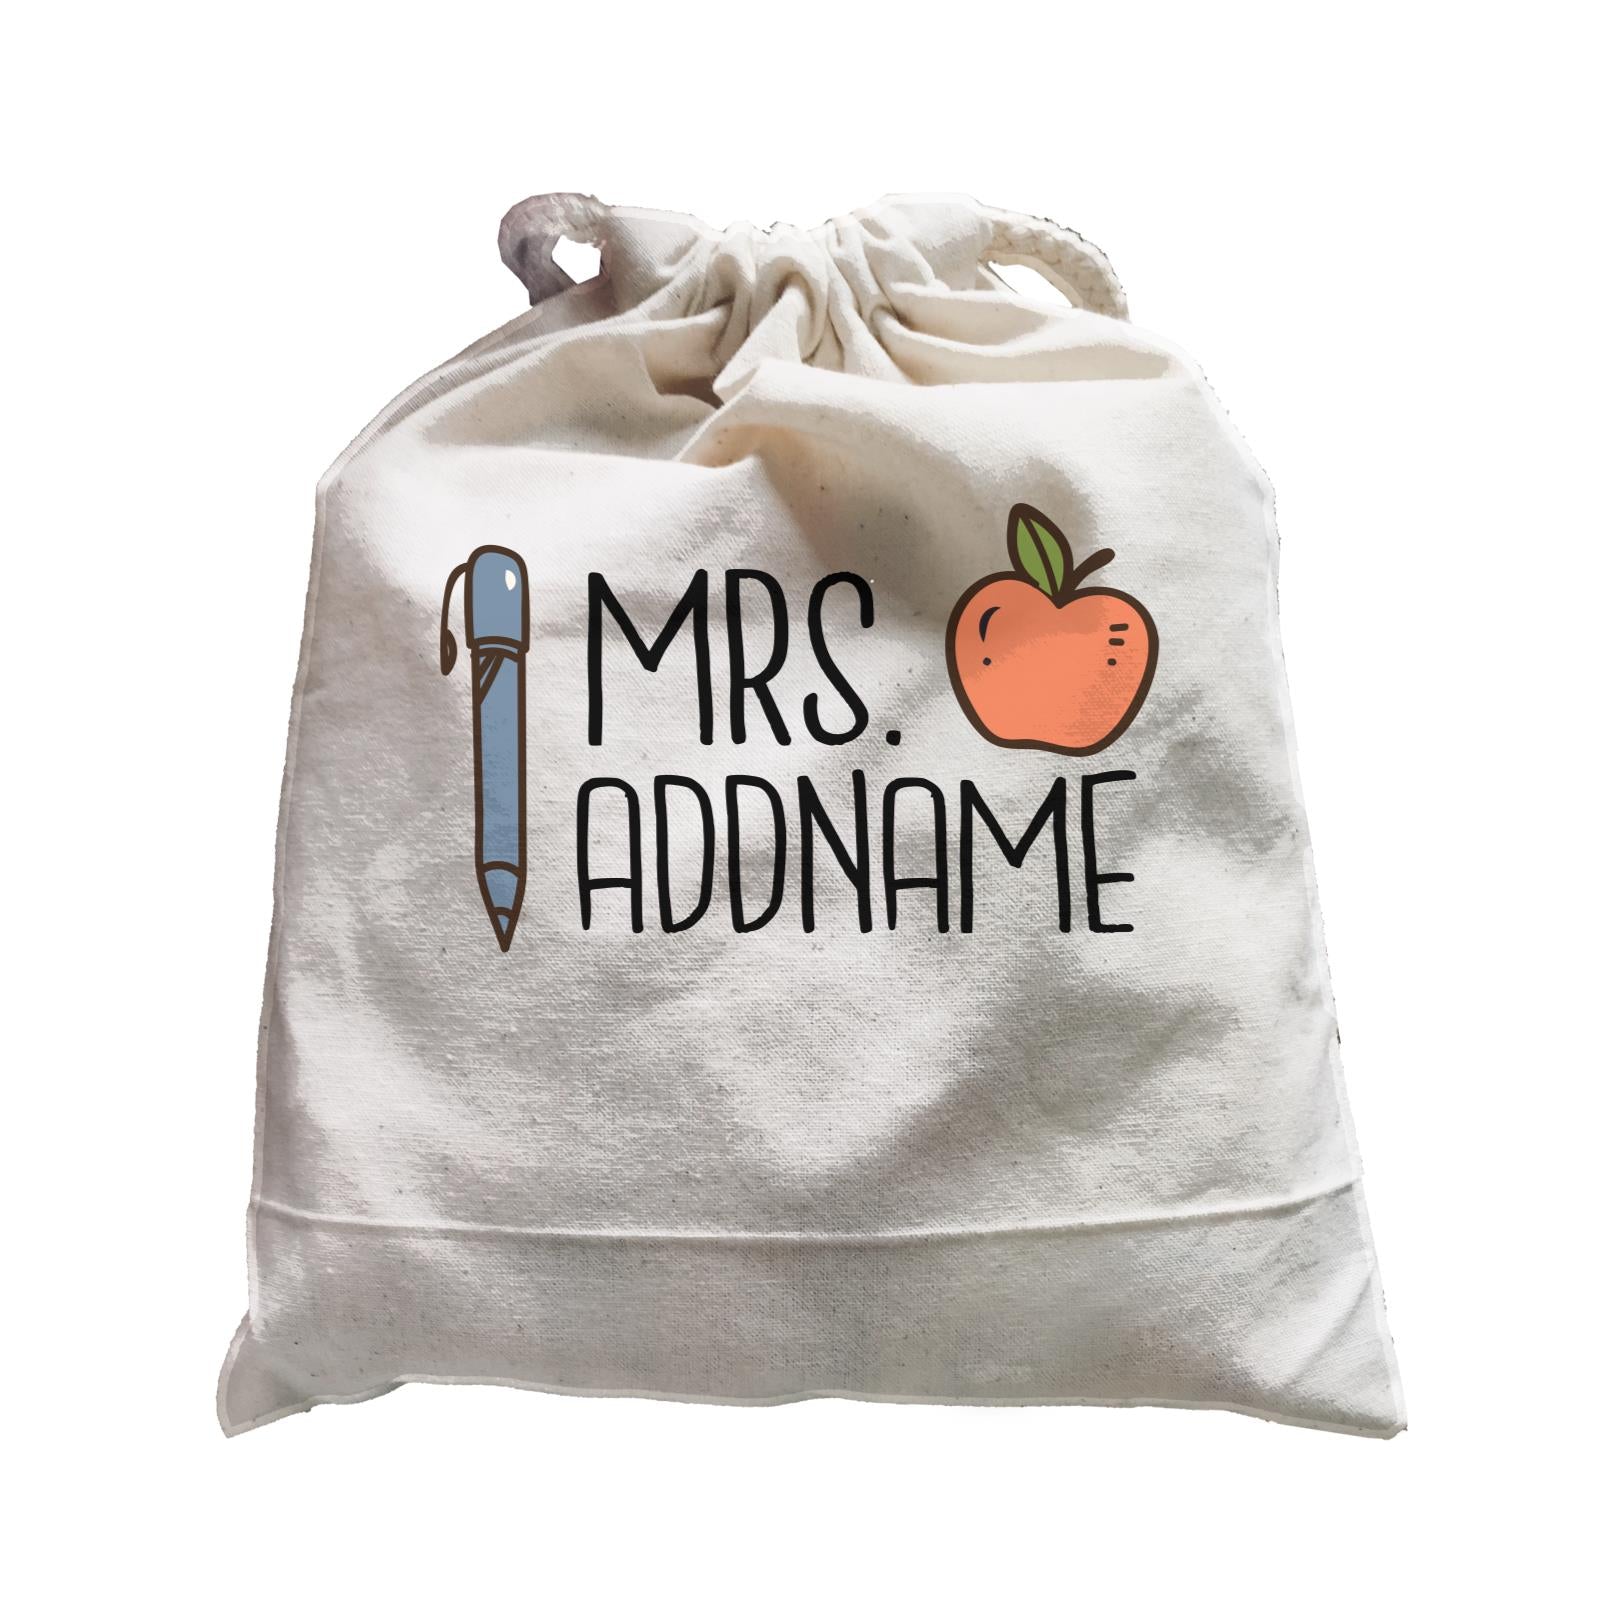 Teacher Addname Apple And Pen Mrs Addname Satchel